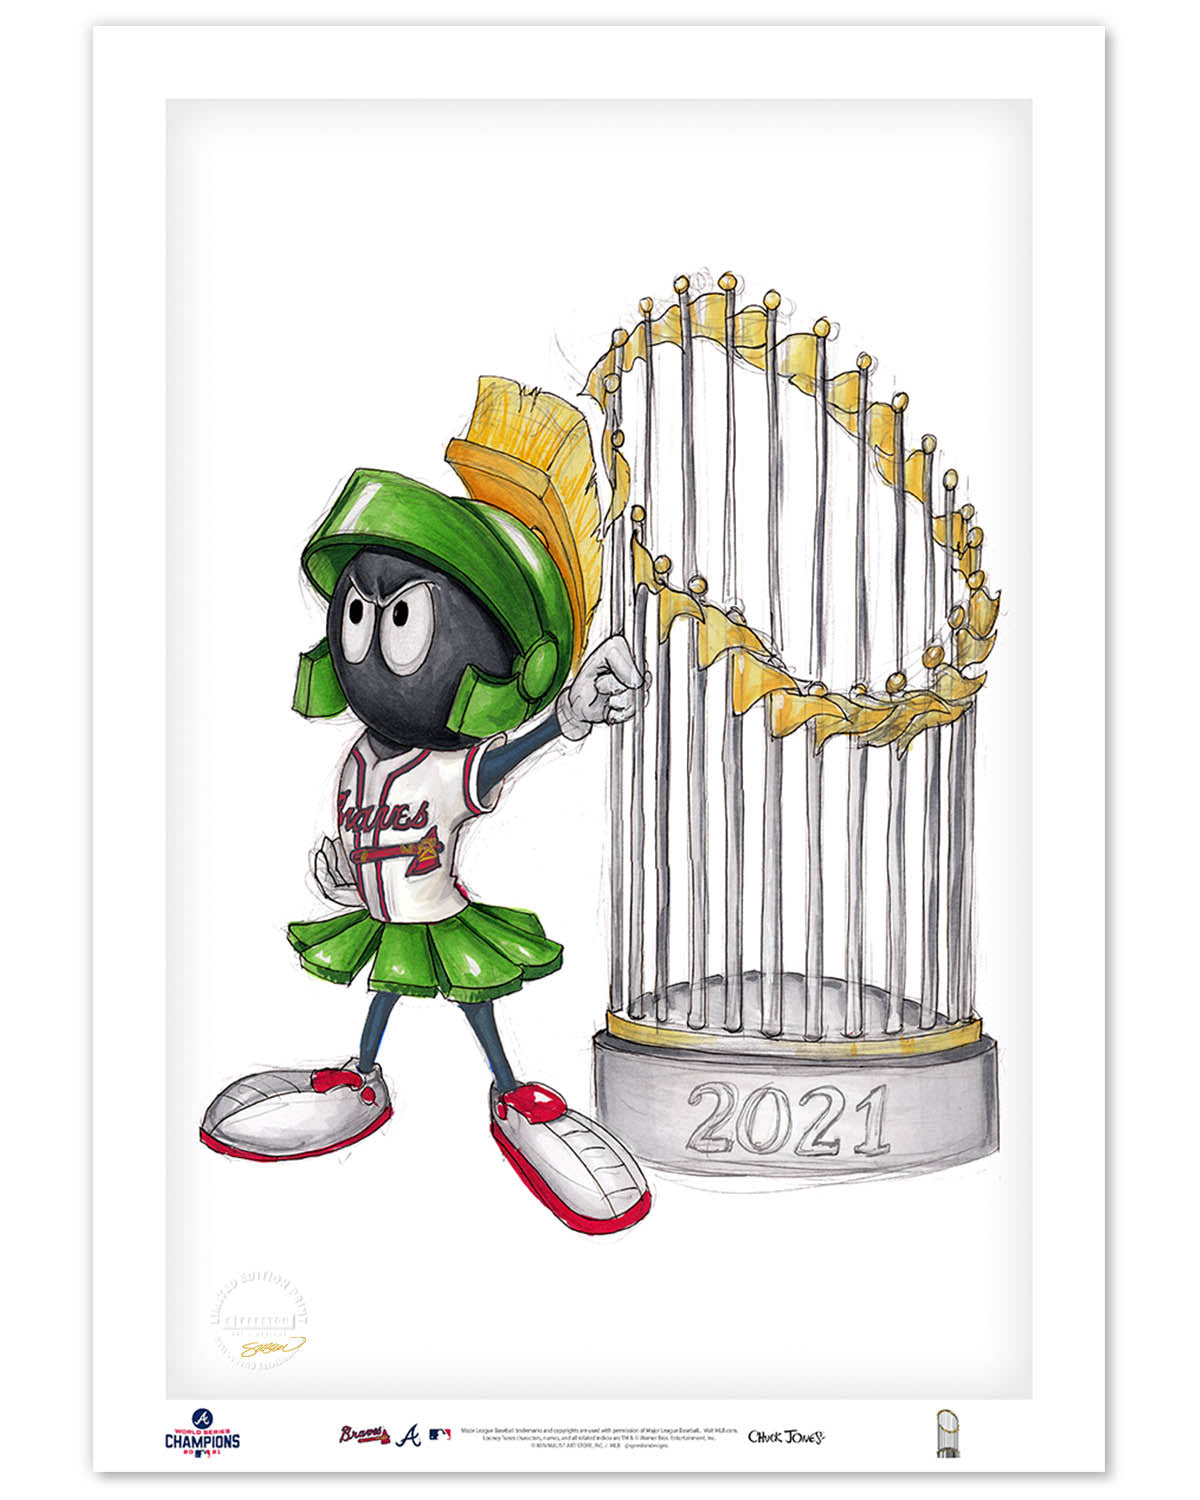 World Series Marvin The Martian 2021 Limited Edition Fine Art Print